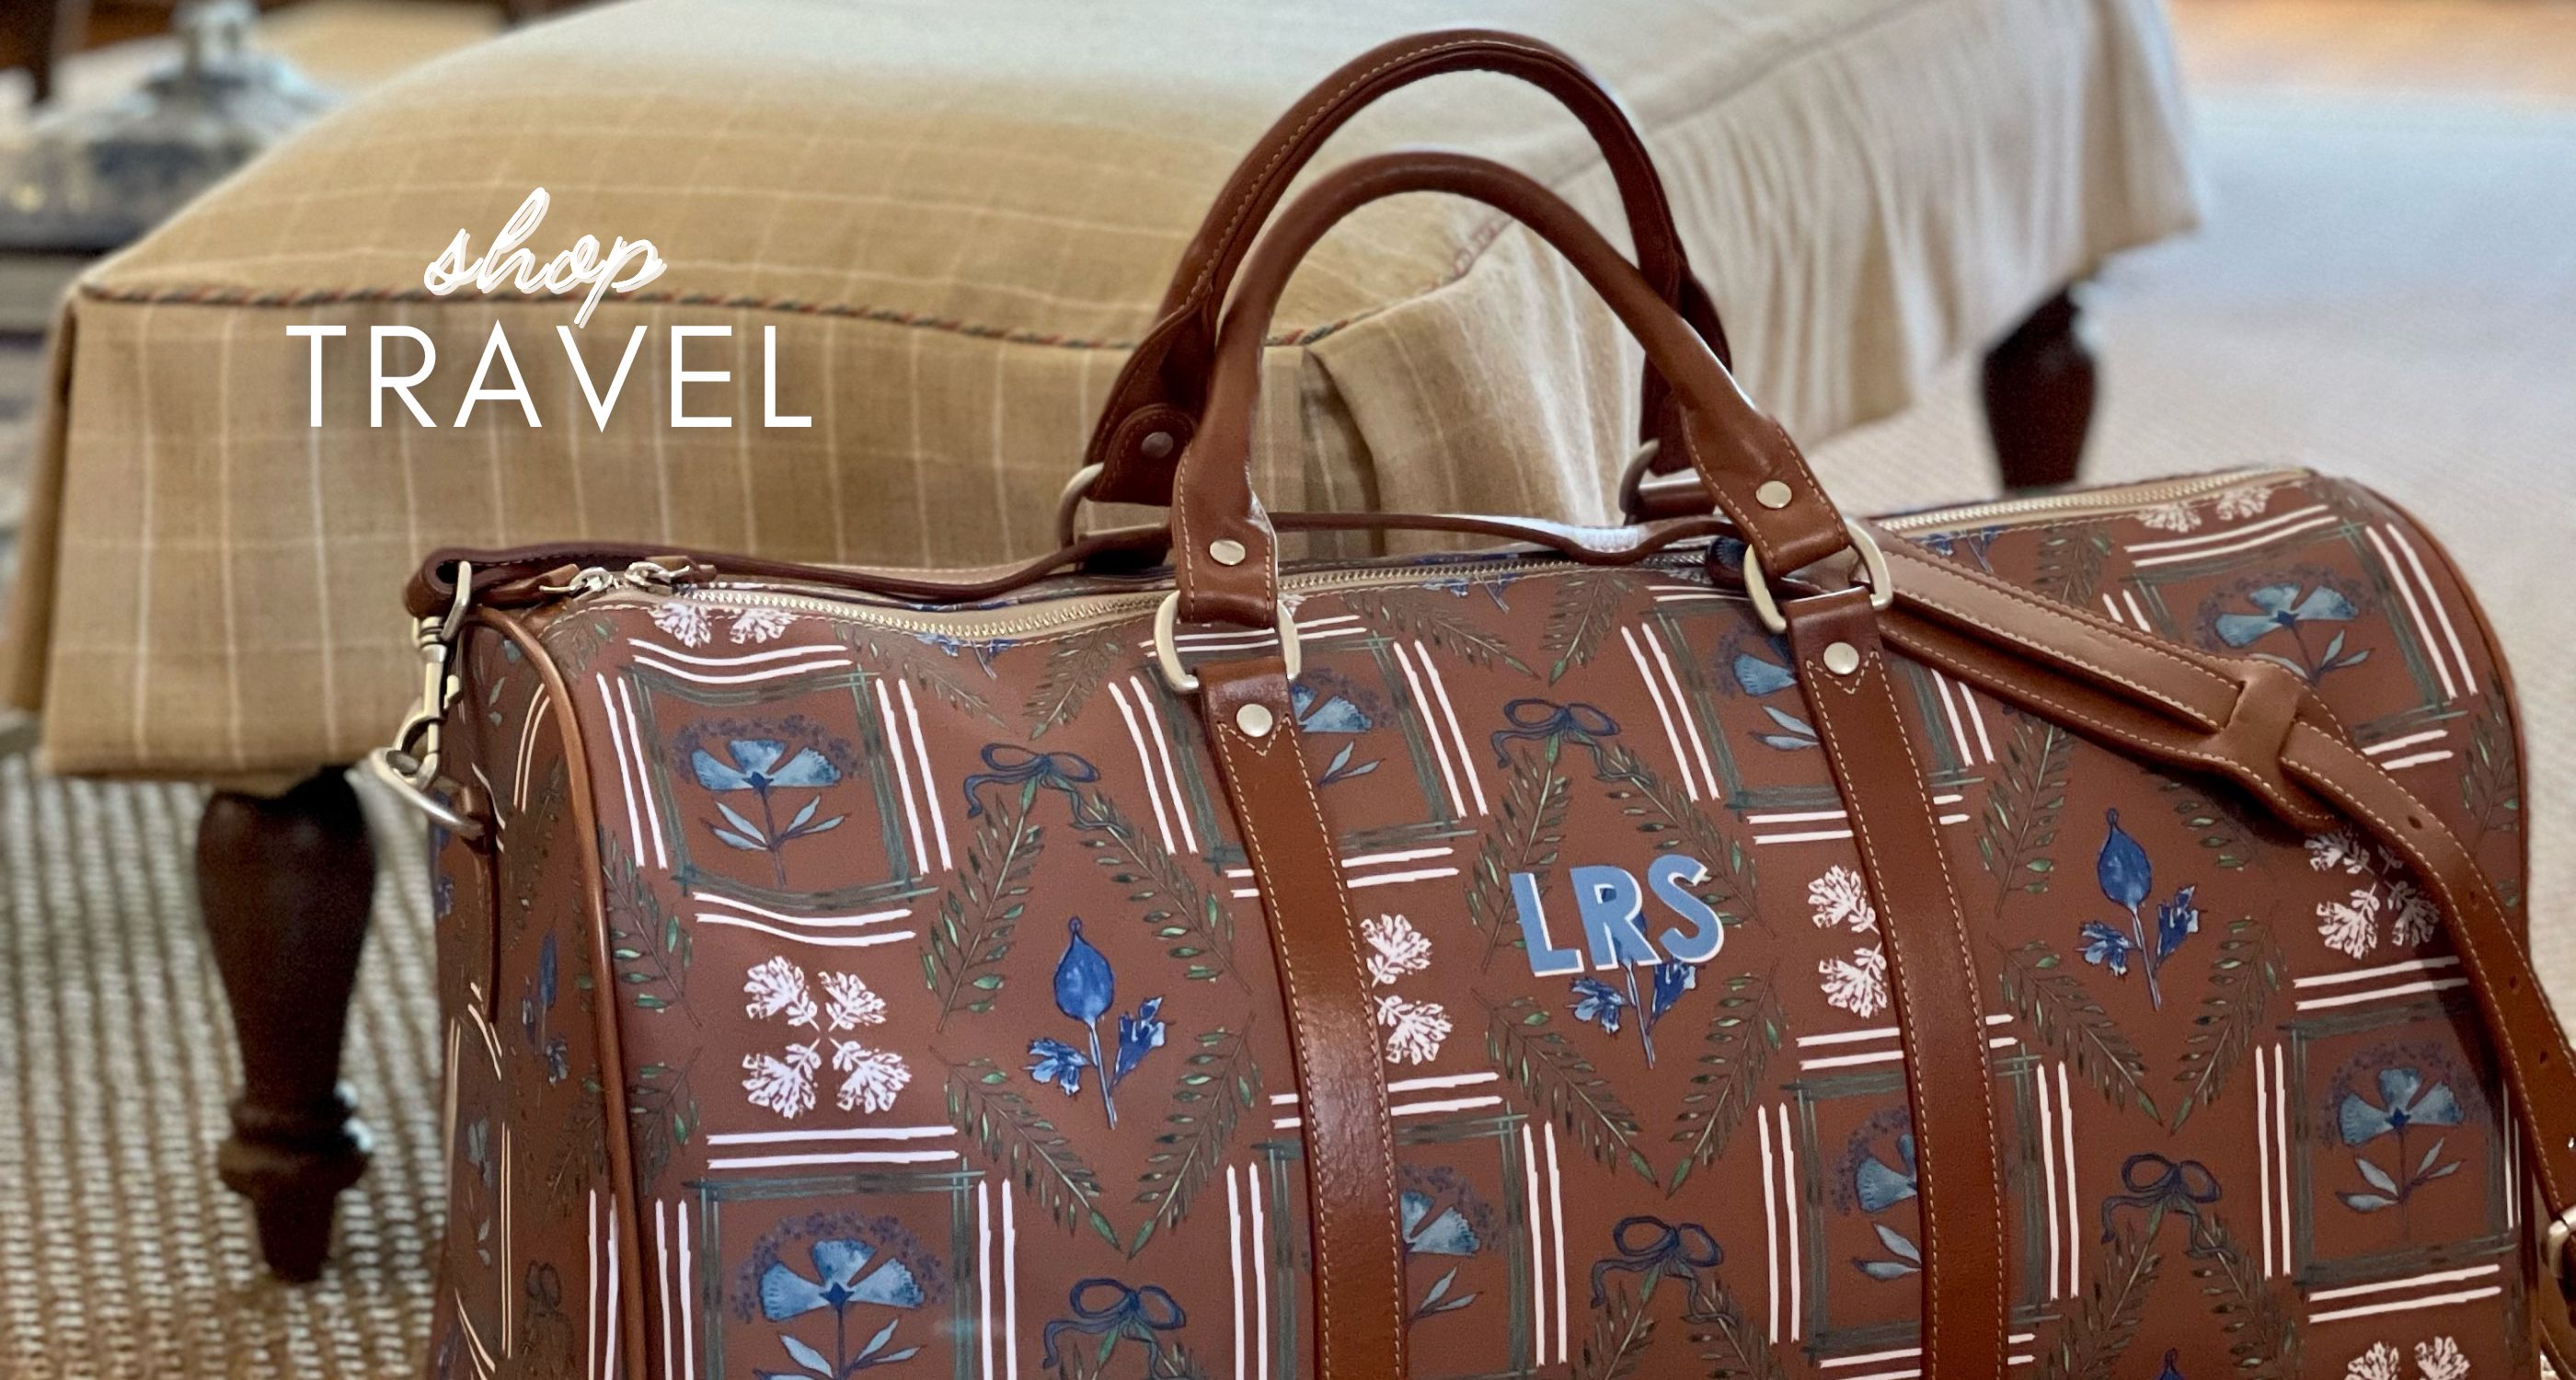 Luxury Travel Totes - Travel Accessories - Personalized Travel Bags